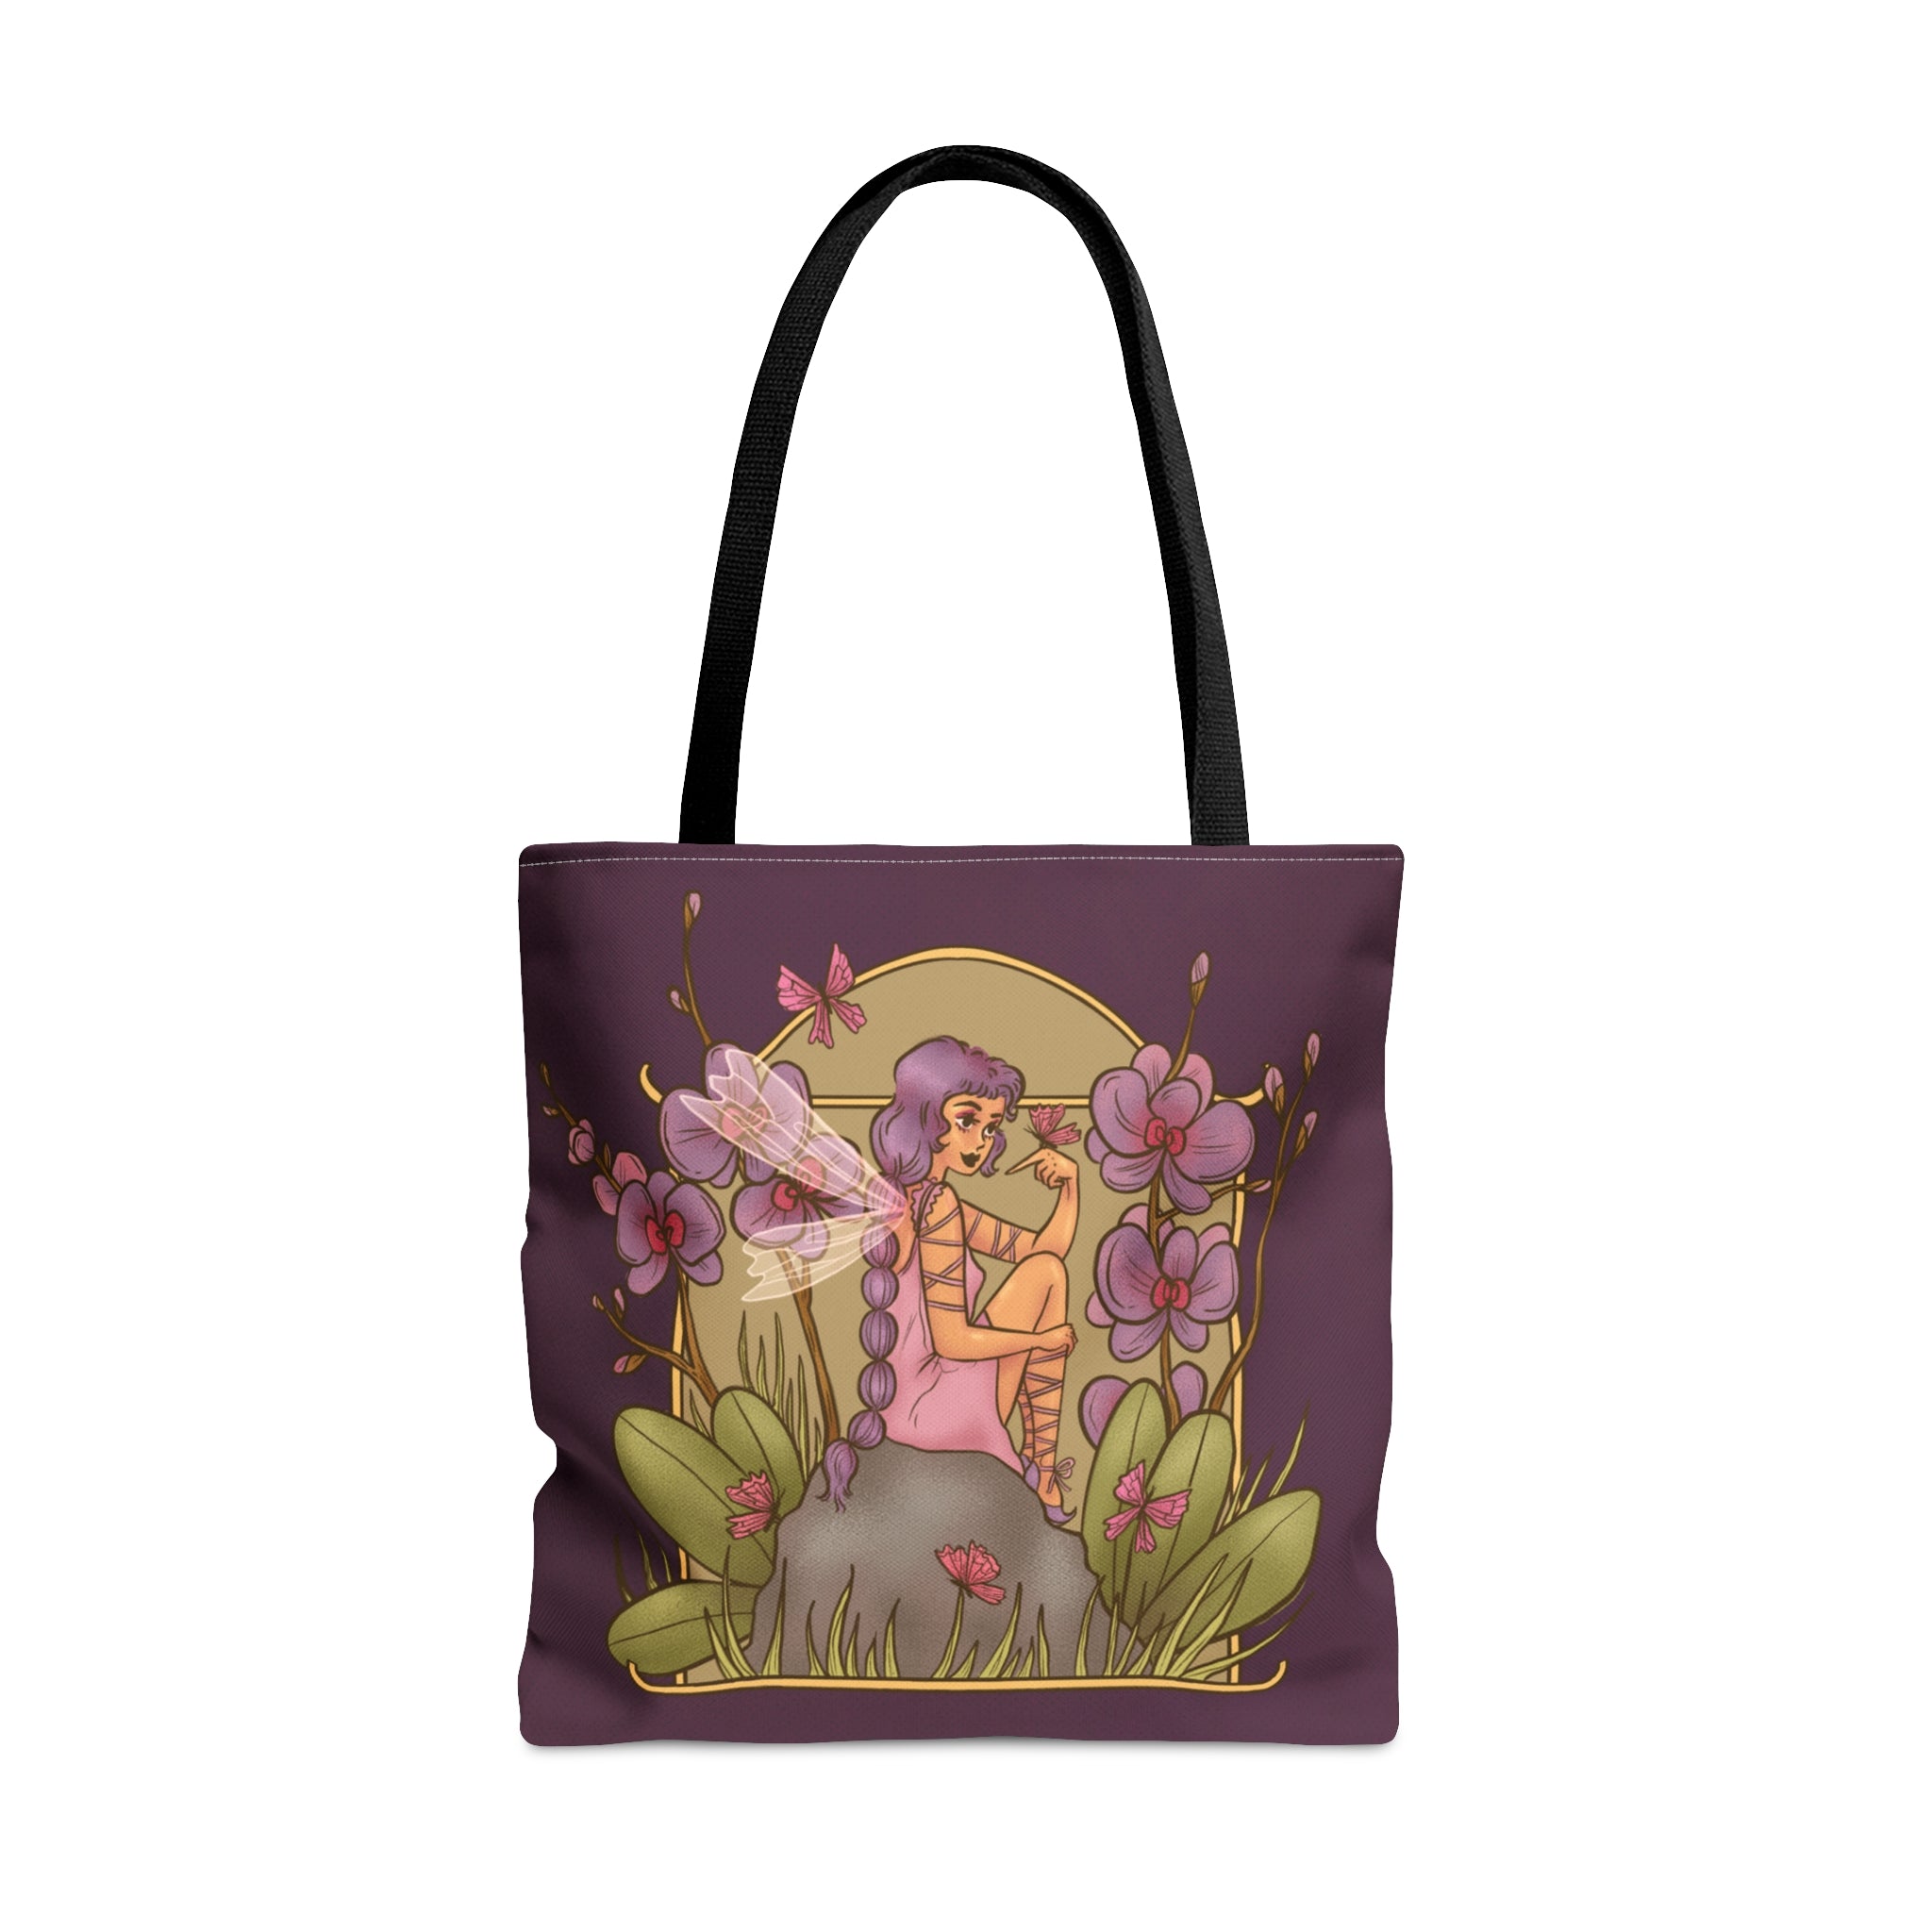 The Butterfly Fairy Tote